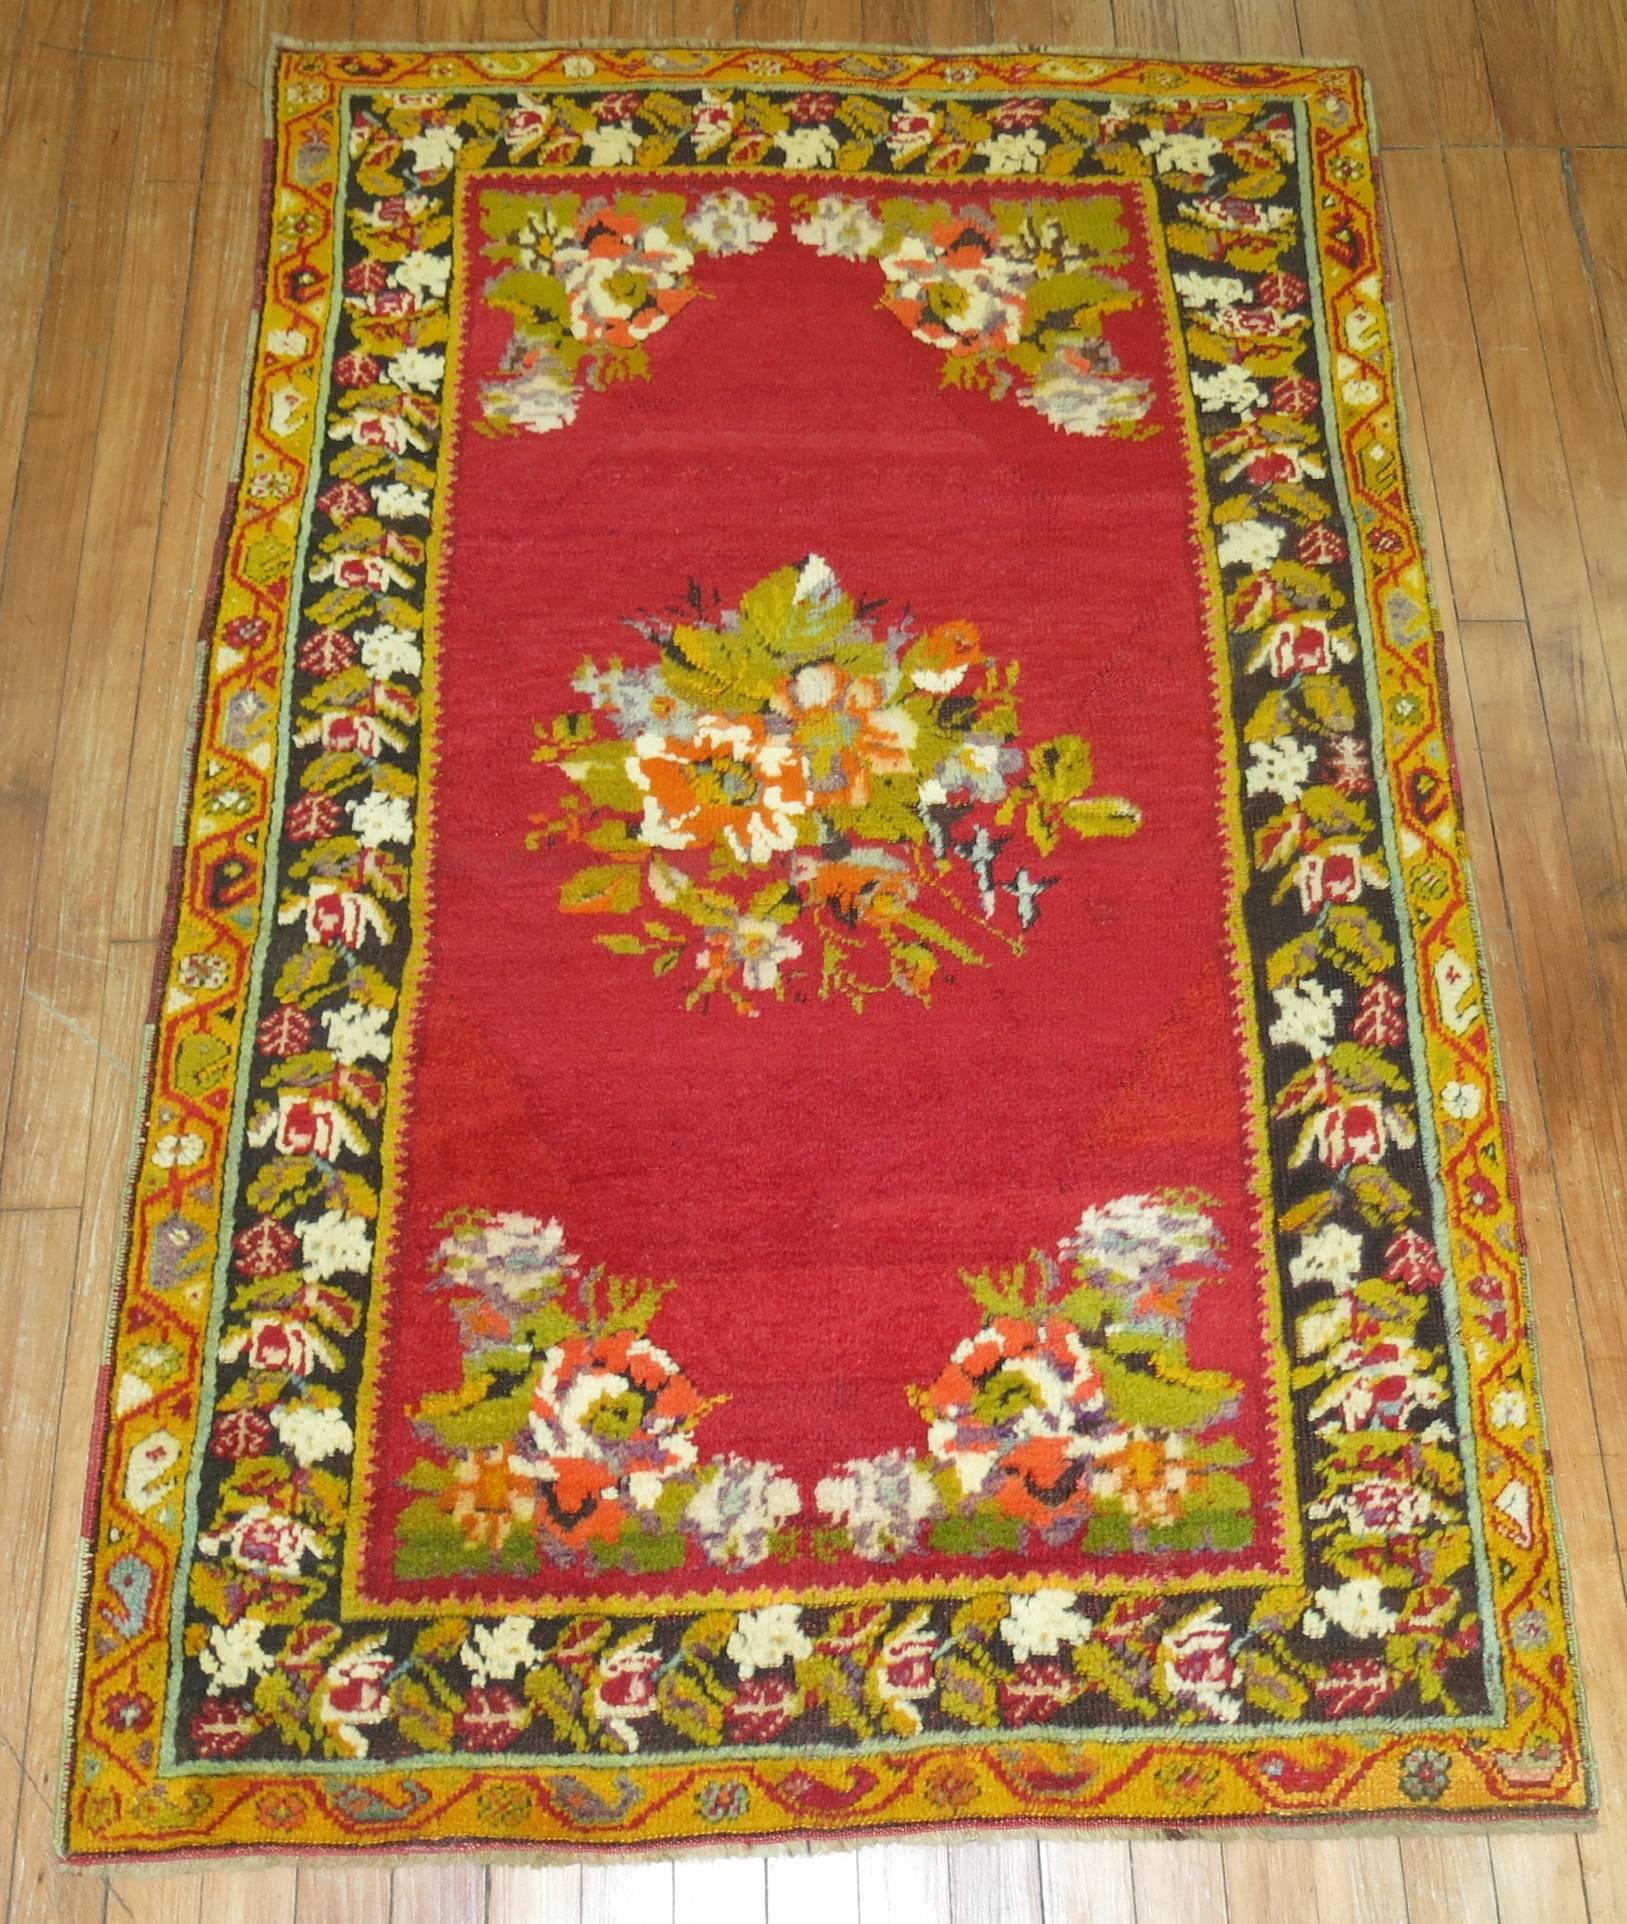 Brightly colored vintage Turkish rug with a floral medallion and border.